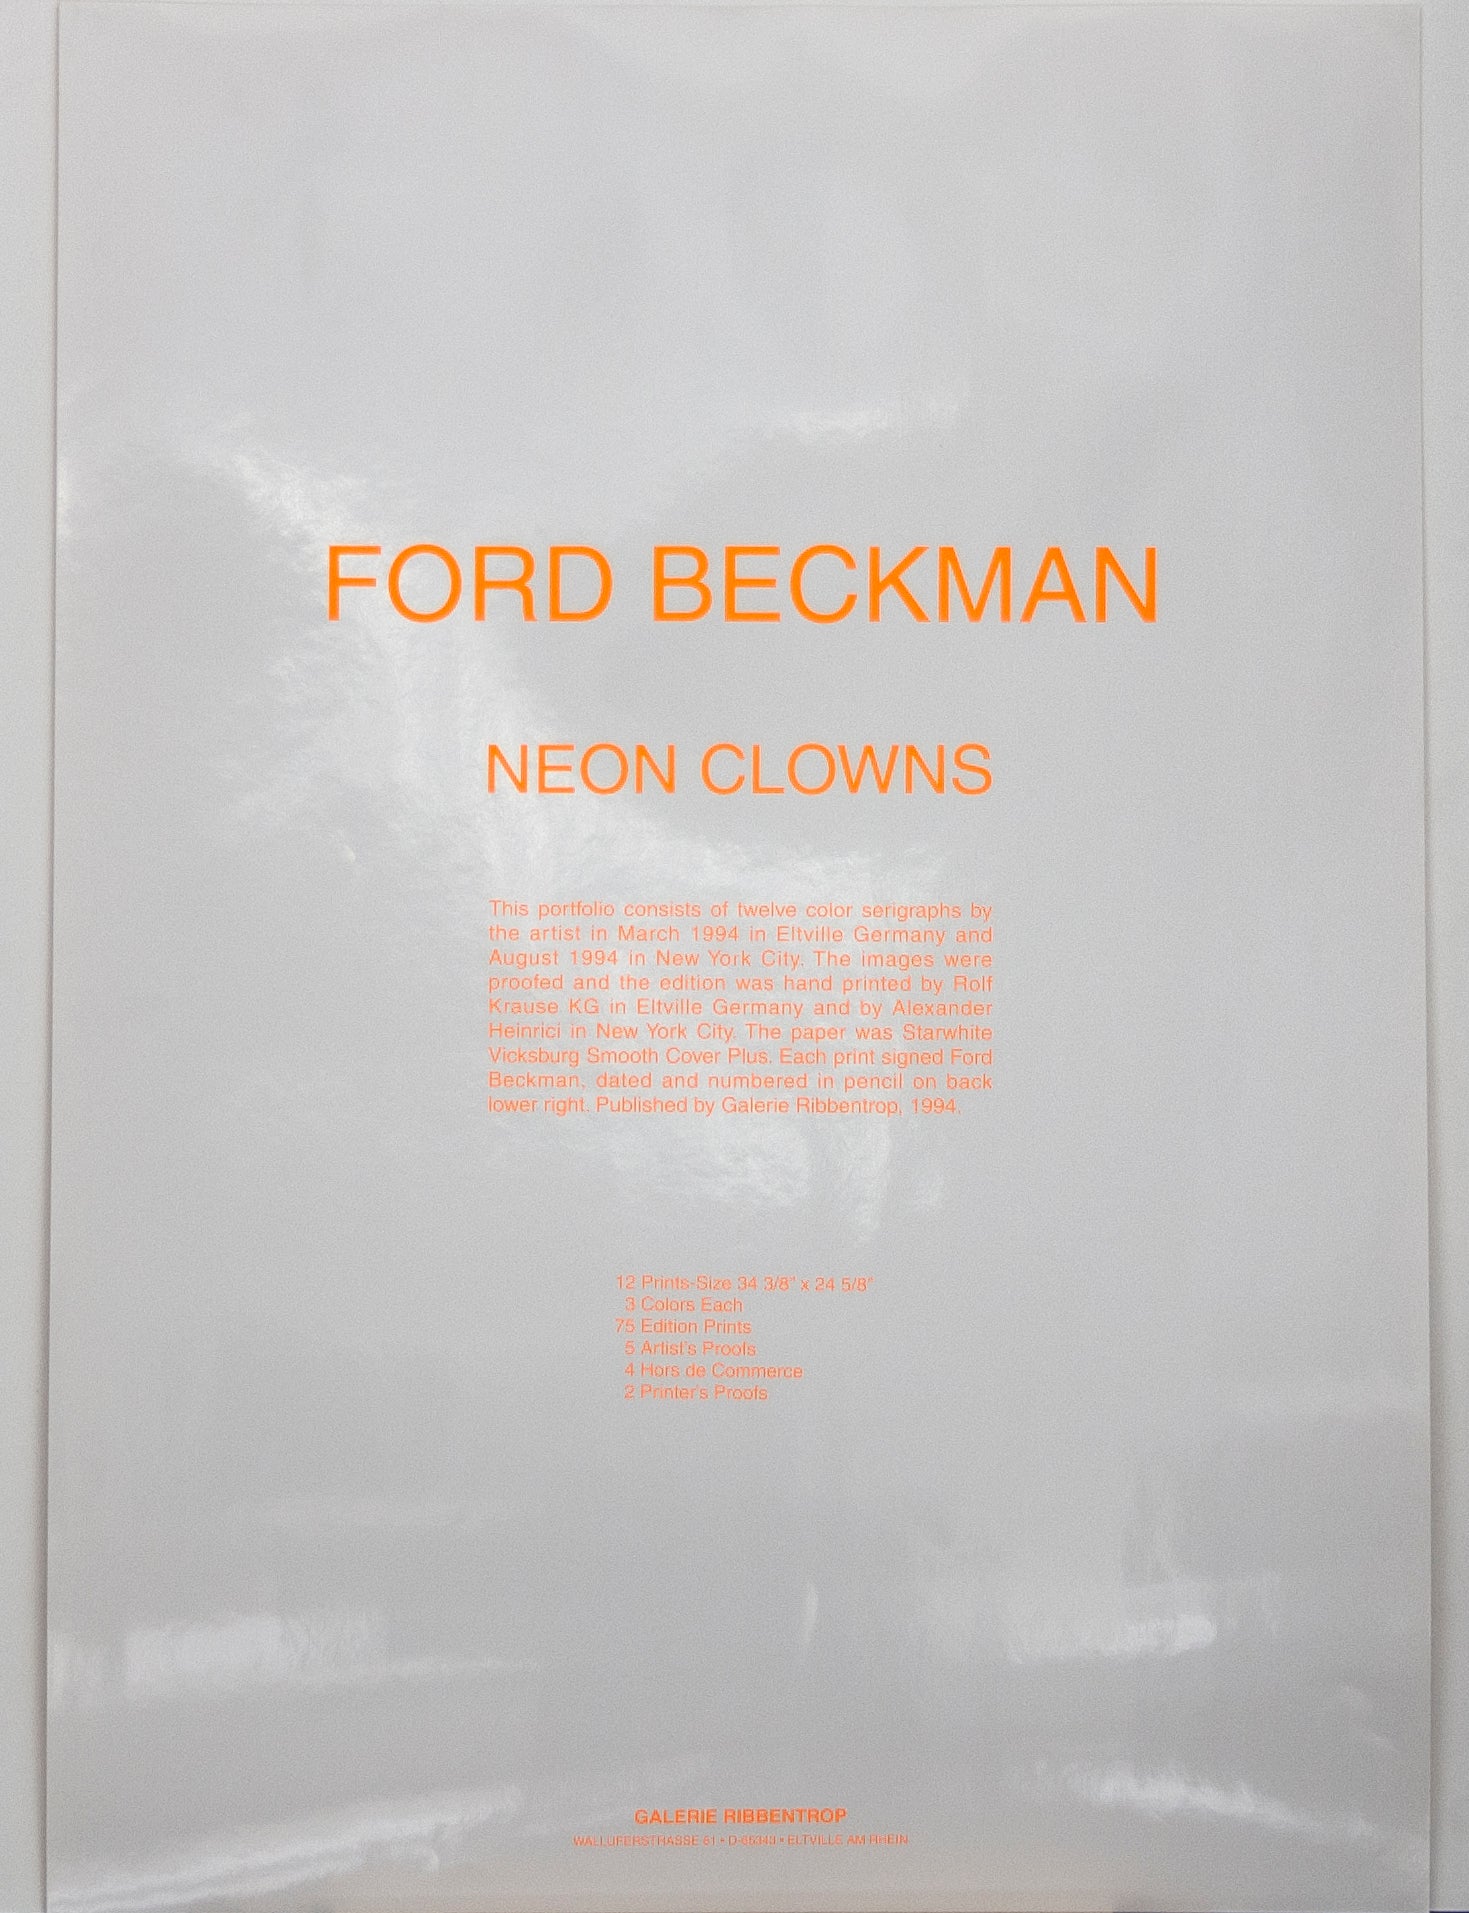 Ford Beckman- Neon Clown Yellow and Black